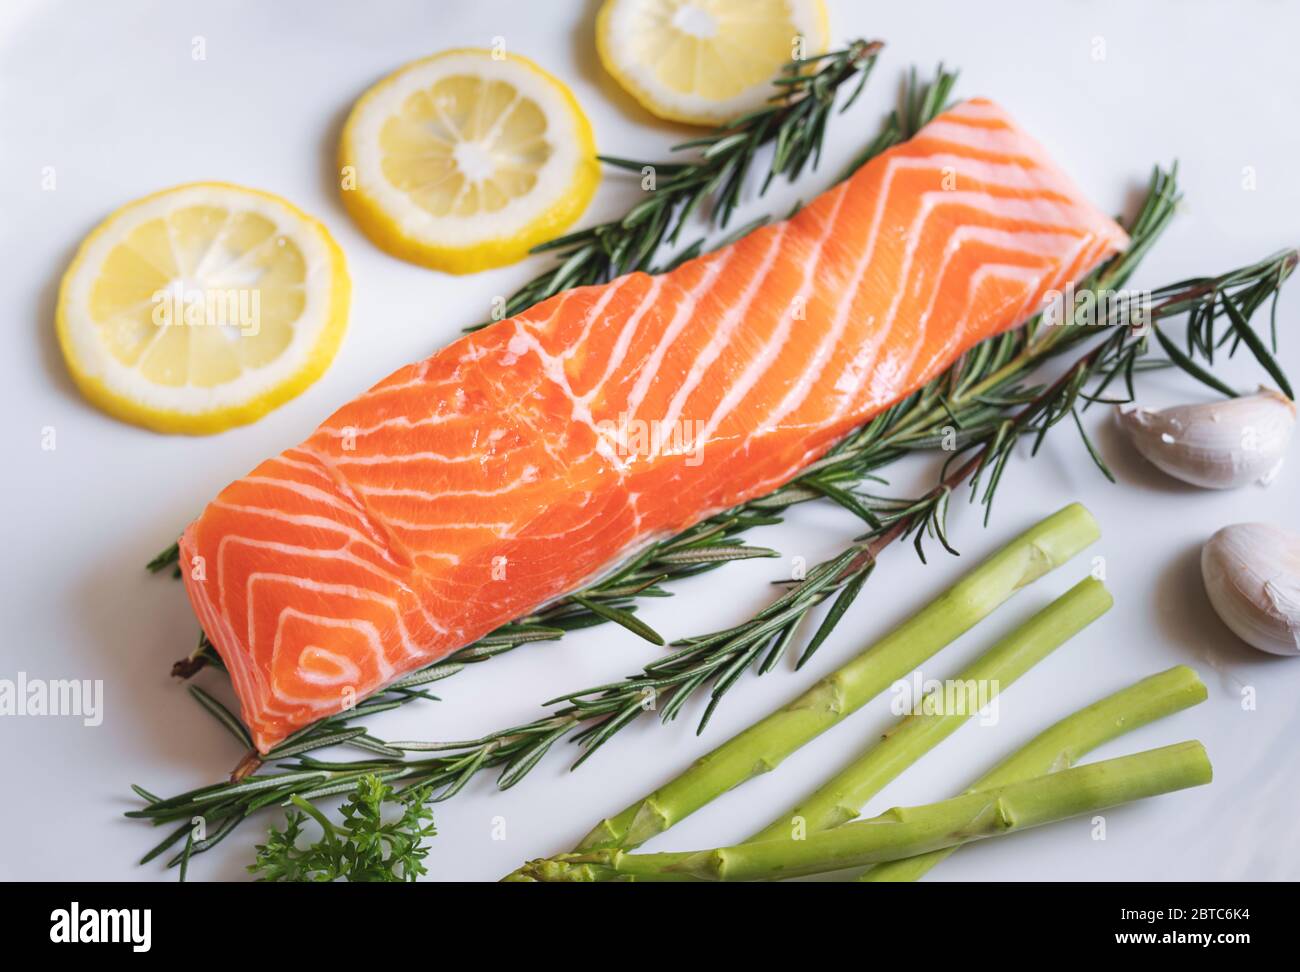 Raw fresh salmon fillet with herbs and ingredients, in white dish Stock Photo